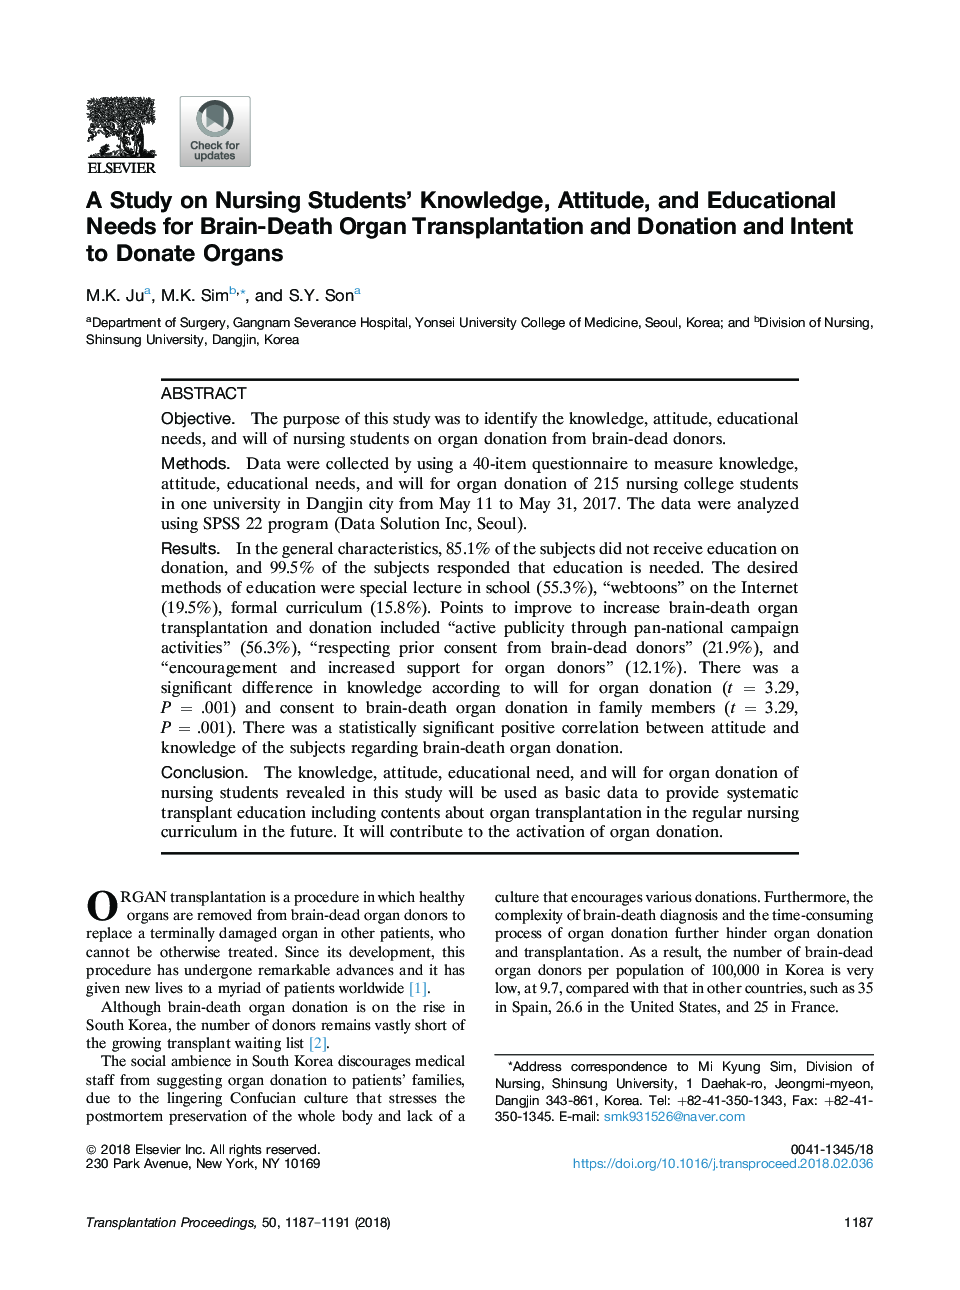 A Study on Nursing Students' Knowledge, Attitude, and Educational Needs for Brain-Death Organ Transplantation and Donation and Intent to Donate Organs